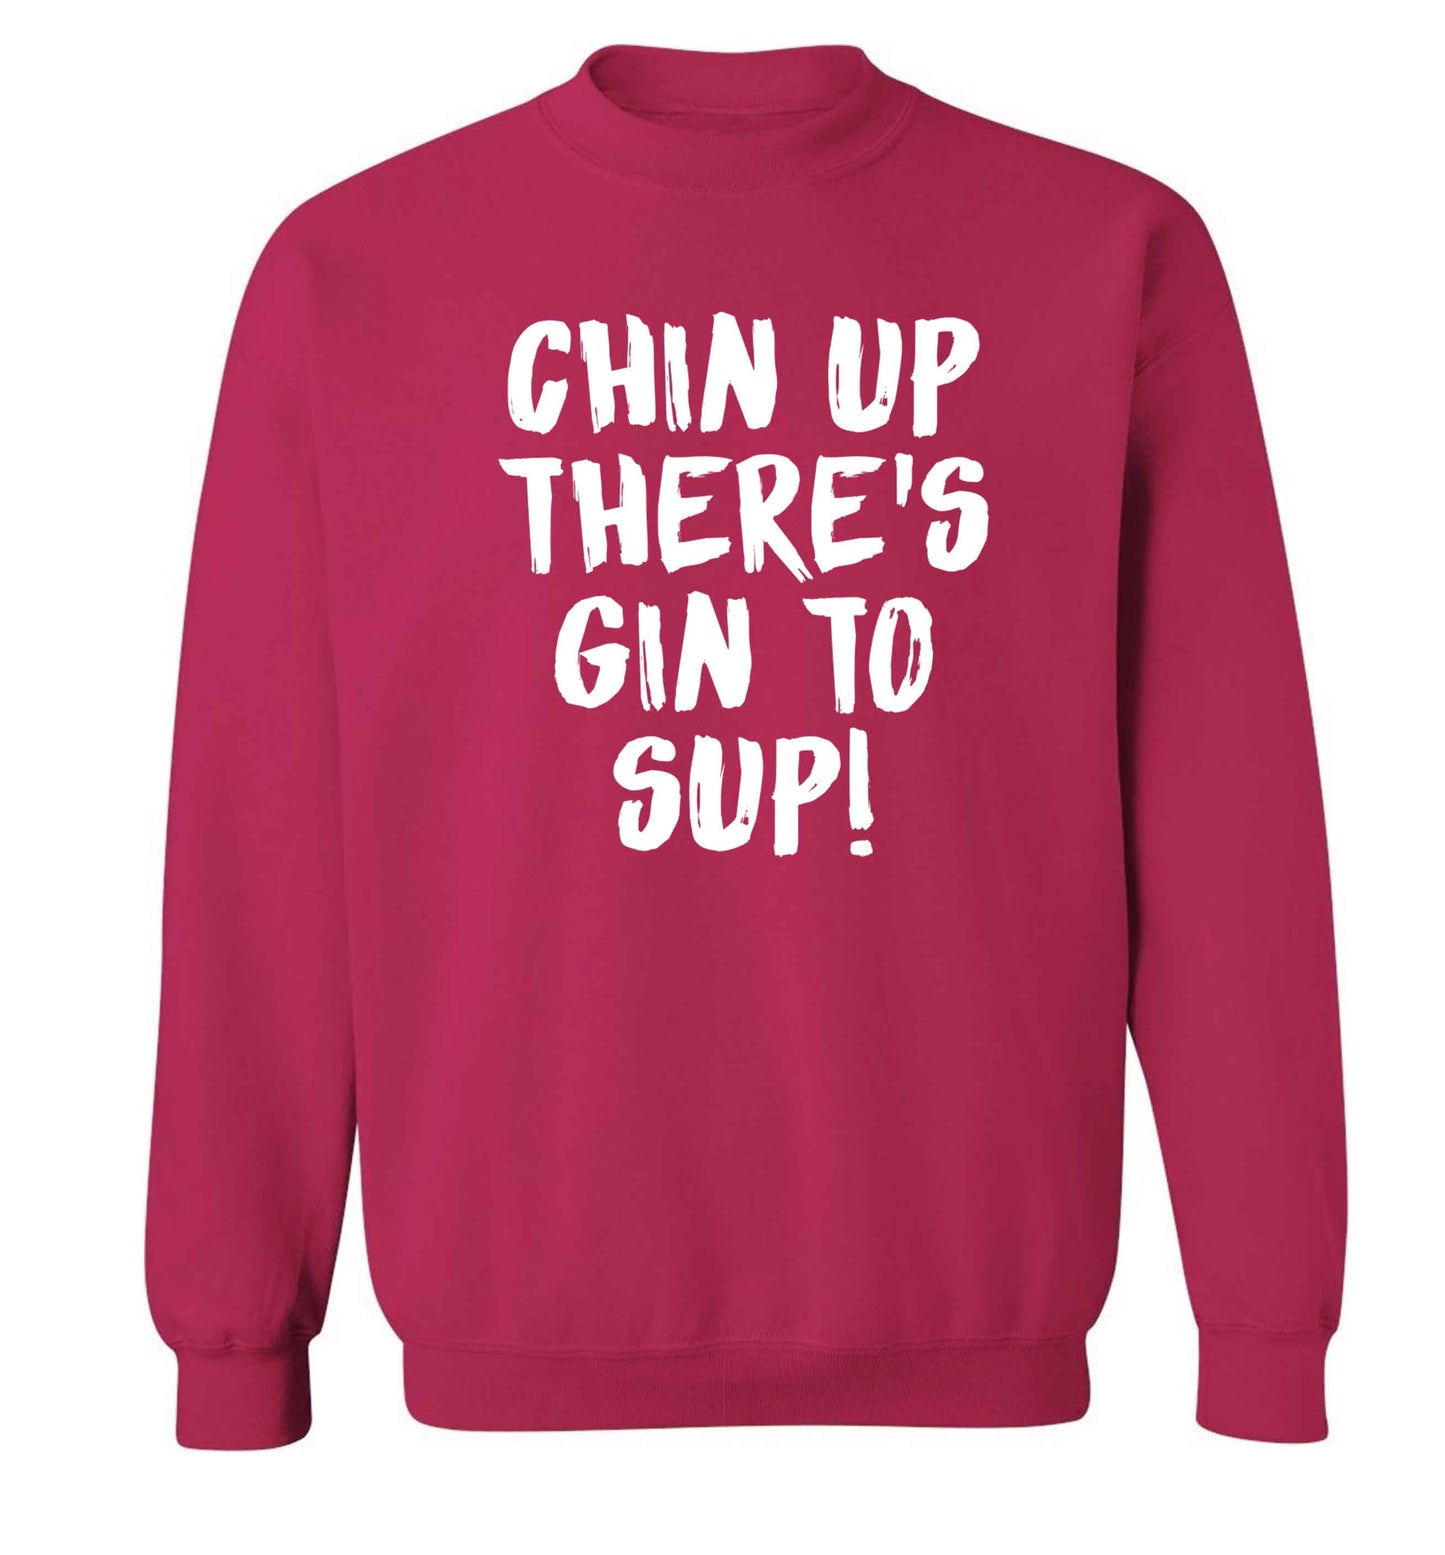 Chin up there's gin to sup Adult's unisex pink Sweater 2XL